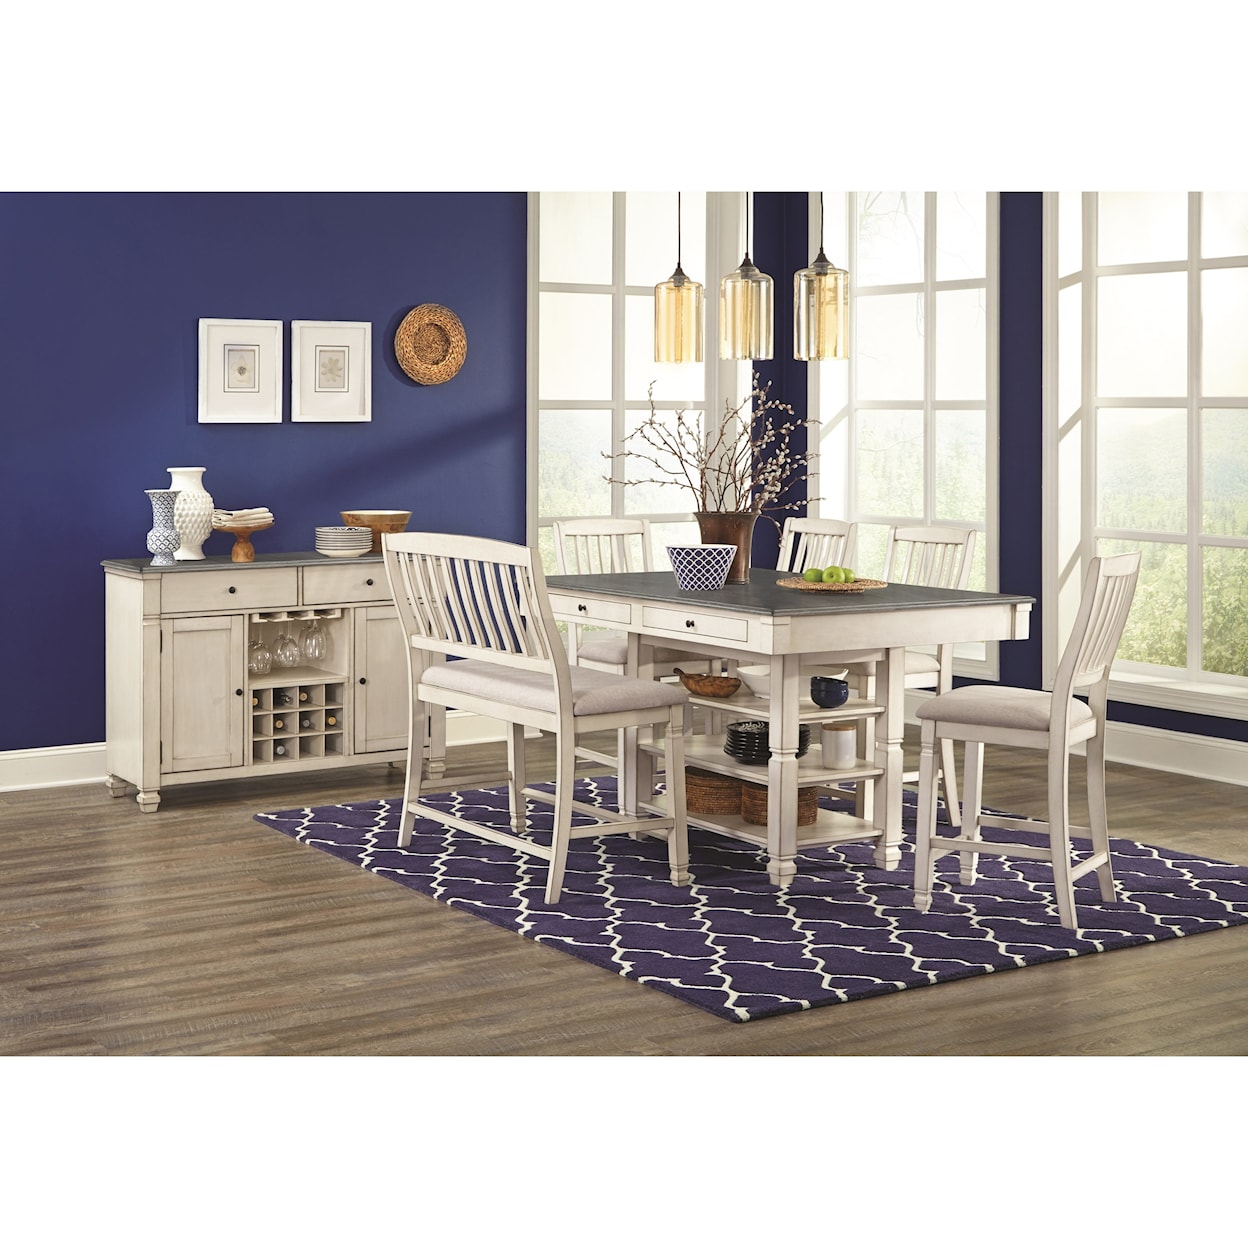 Lifestyle Crafton Dining Room Group